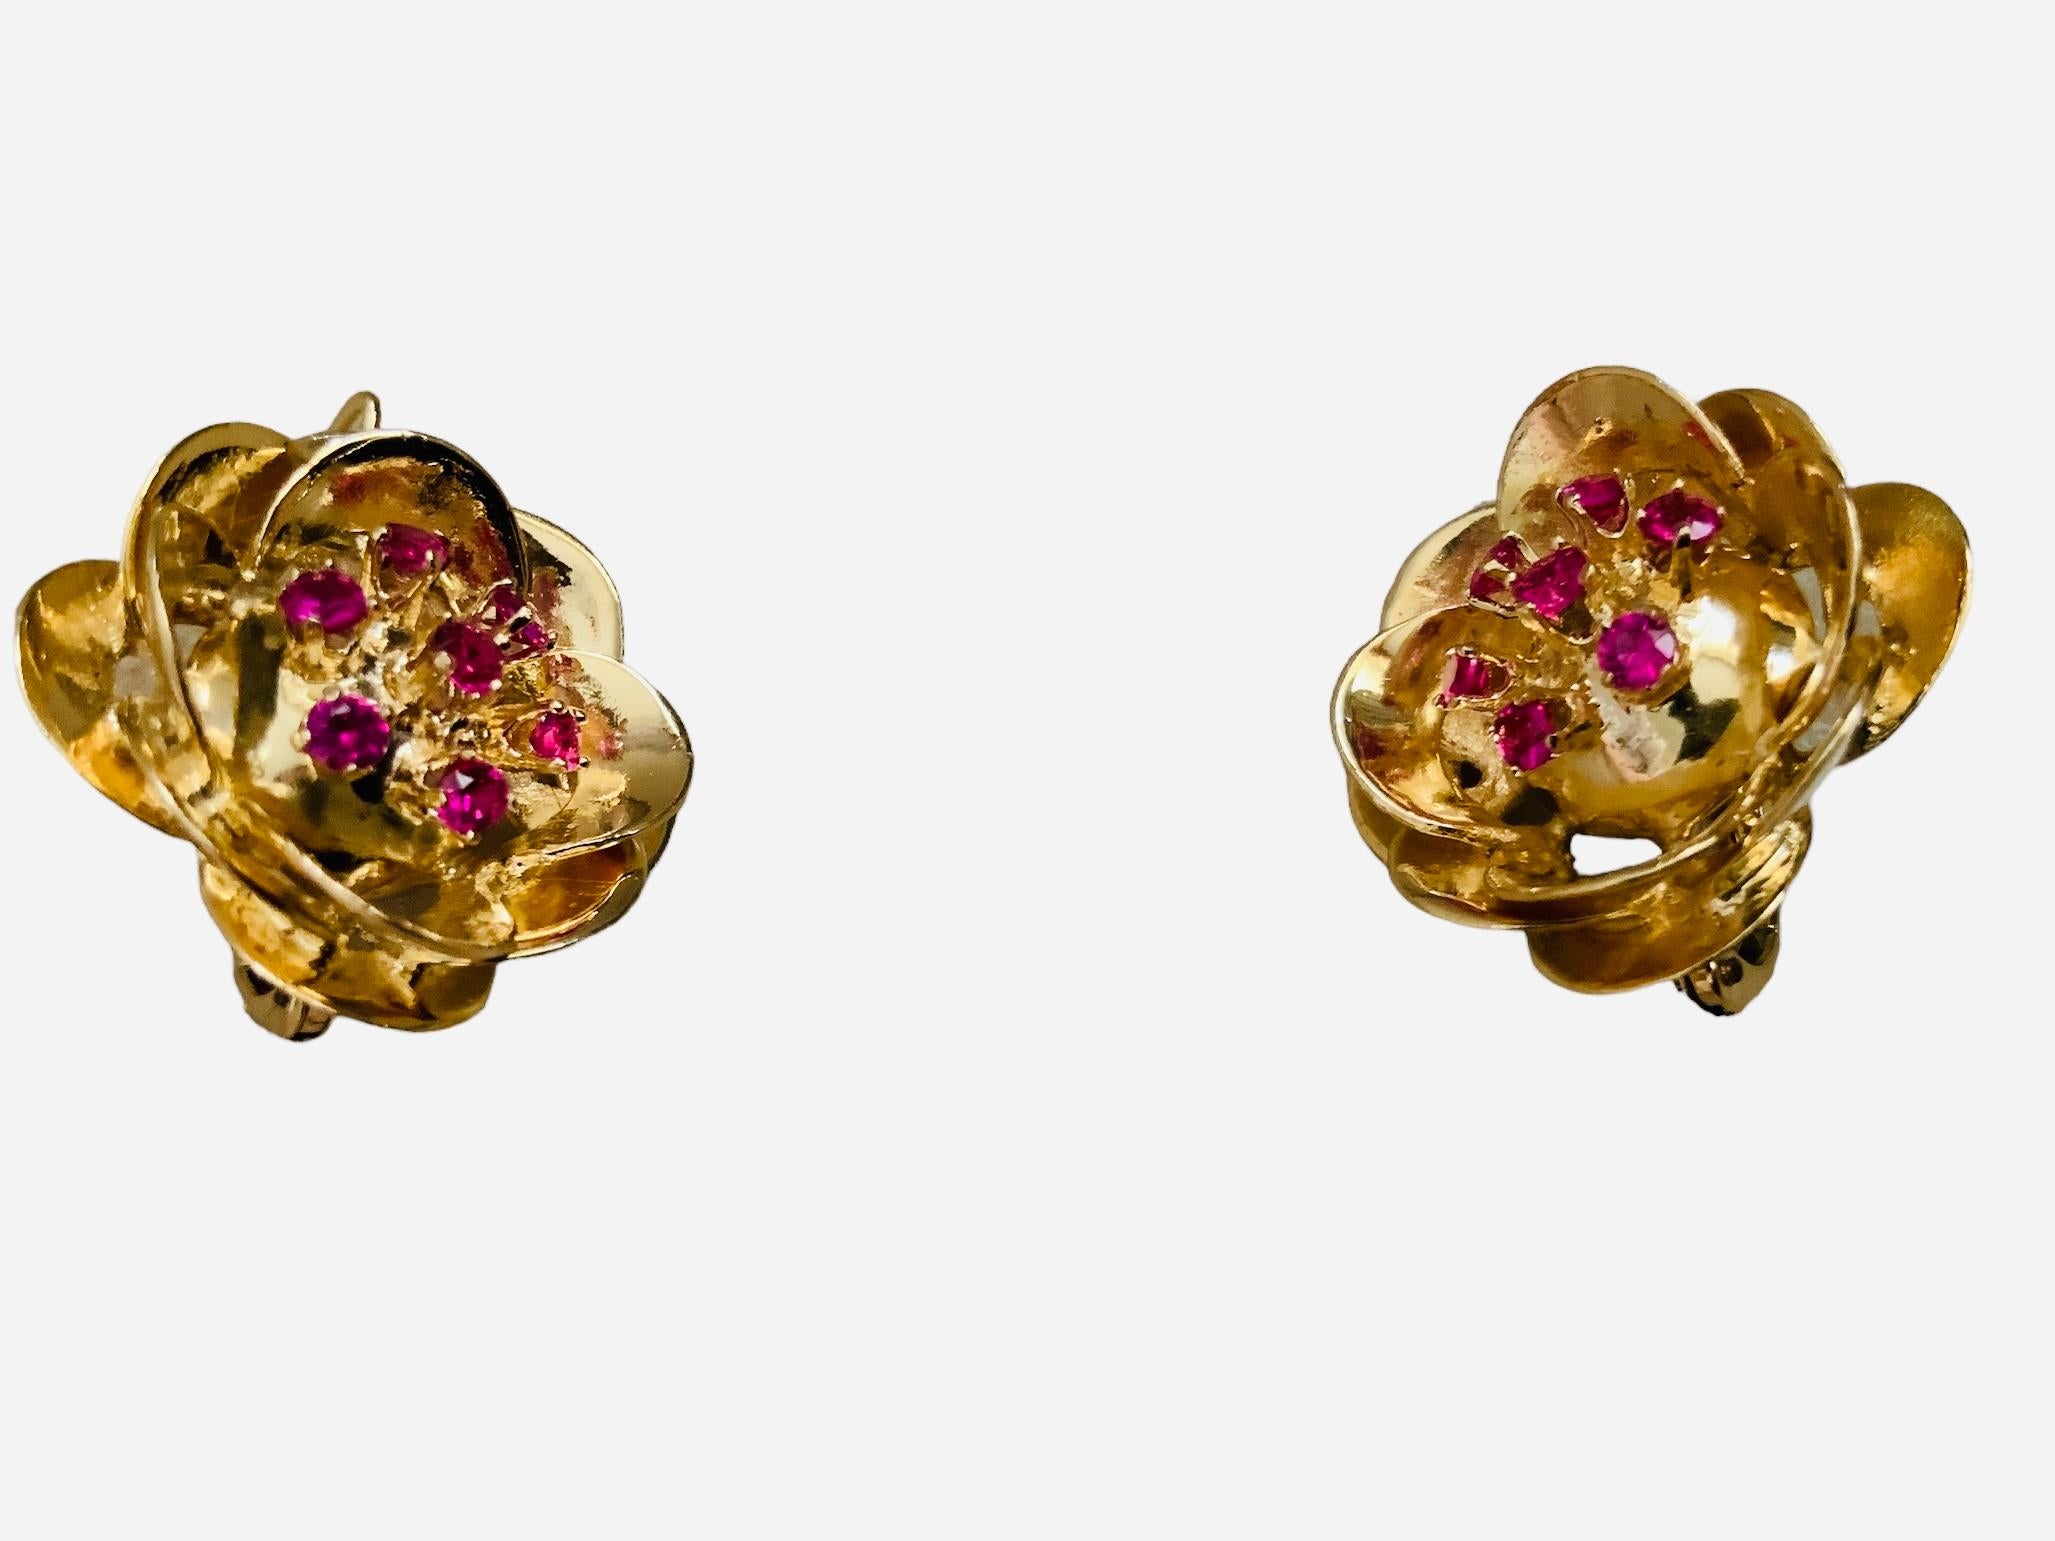 Art Nouveau 14k Yellow Gold Rubies Pair of Earrings For Sale